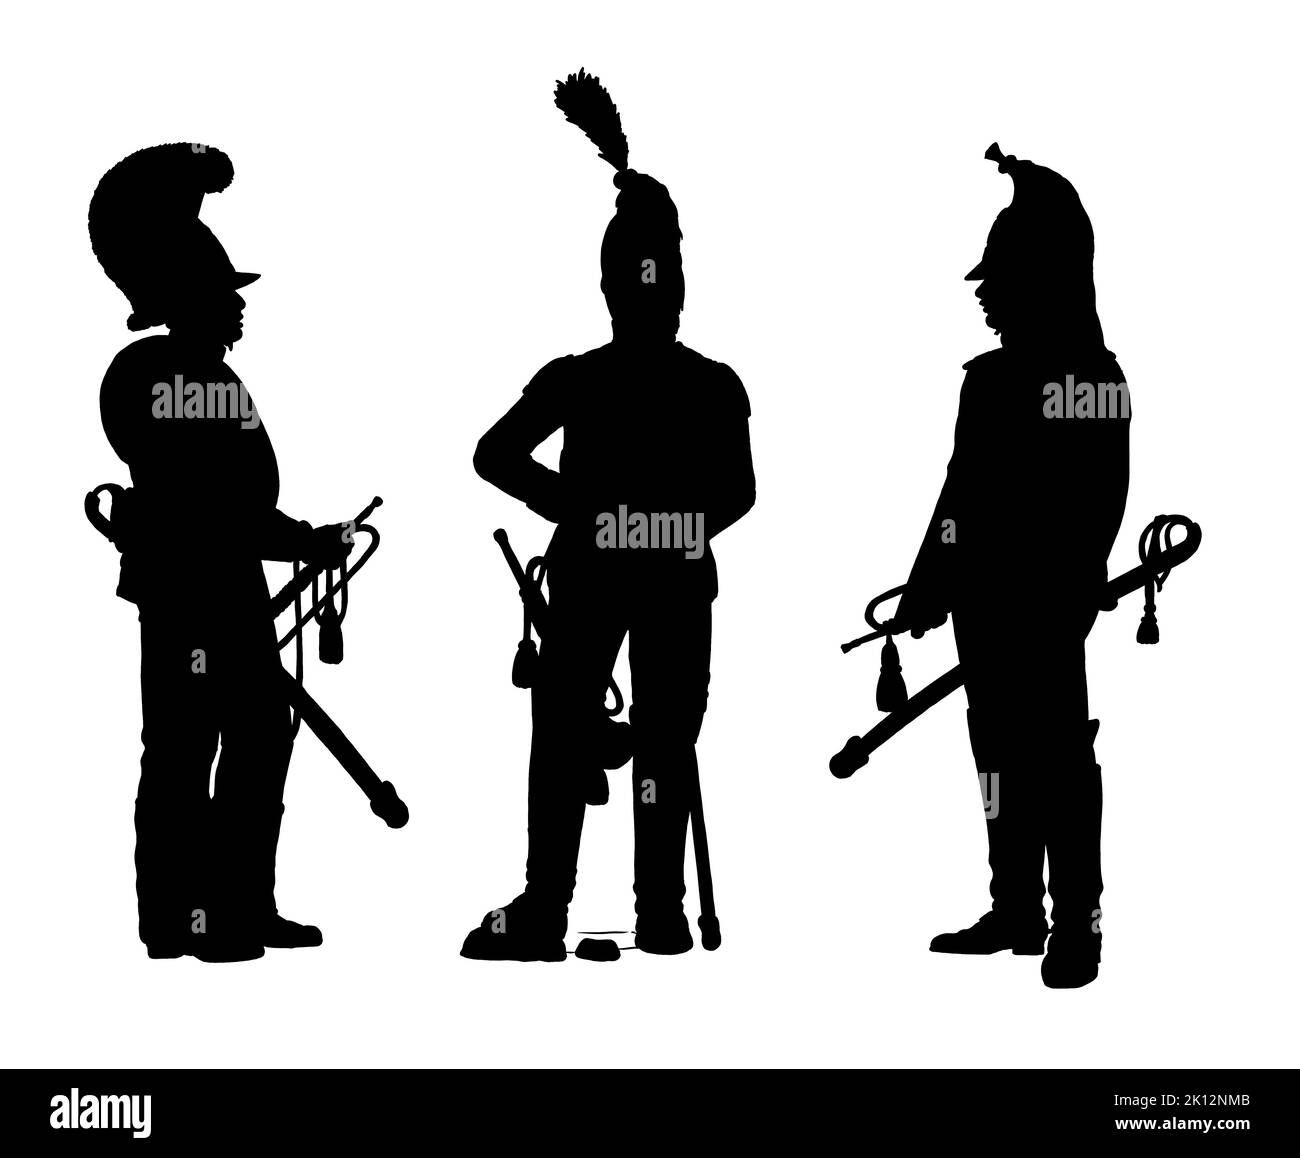 German trumpeters during the Napoleon War. Napoleon Bonaparte and his wars. Historical silhouette drawing. Stock Photo